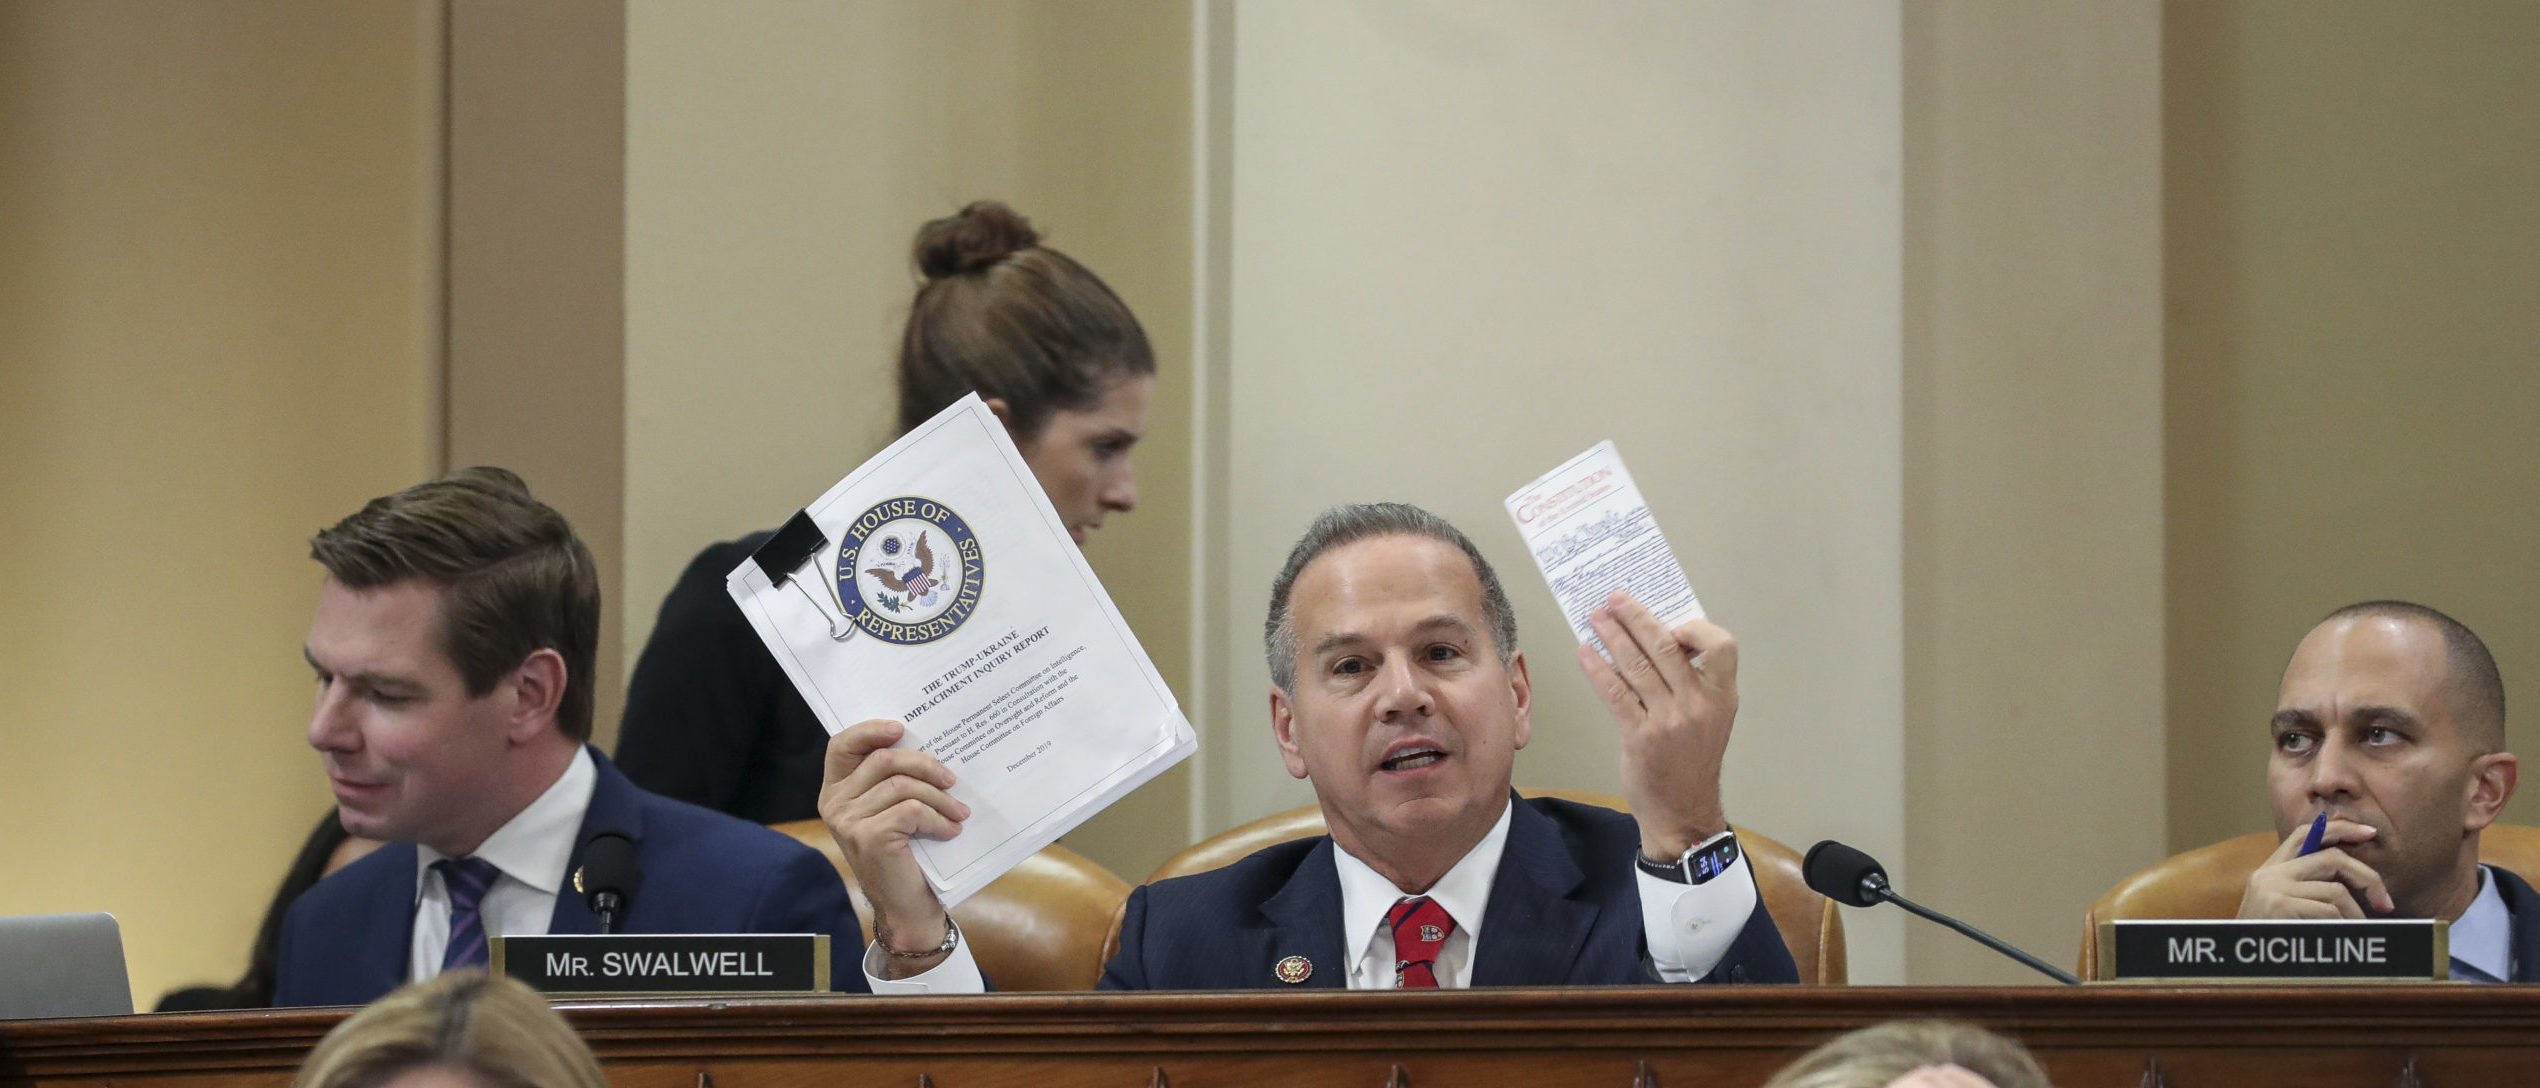 WASHINGTON, DC - DECEMBER 12:U.S. Rep. David Cicilline (D-RI) holds up a copy of the House Intelligence Committee's report on the impeachment inquiry and a copy of the U.S. Constitution during a House Judiciary Committee markup hearing on the articles of impeachment against U.S. President Donald Trump in the Longworth House Office Building on Capitol Hill December 12, 2019 in Washington, DC. The articles of impeachment charge Trump with abuse of power and obstruction of Congress. House Democrats claim that Trump posed a 'clear and present danger' to national security and the 2020 election in his dealings with Ukraine over the past year. (Photo by Drew Angerer/Getty Images)